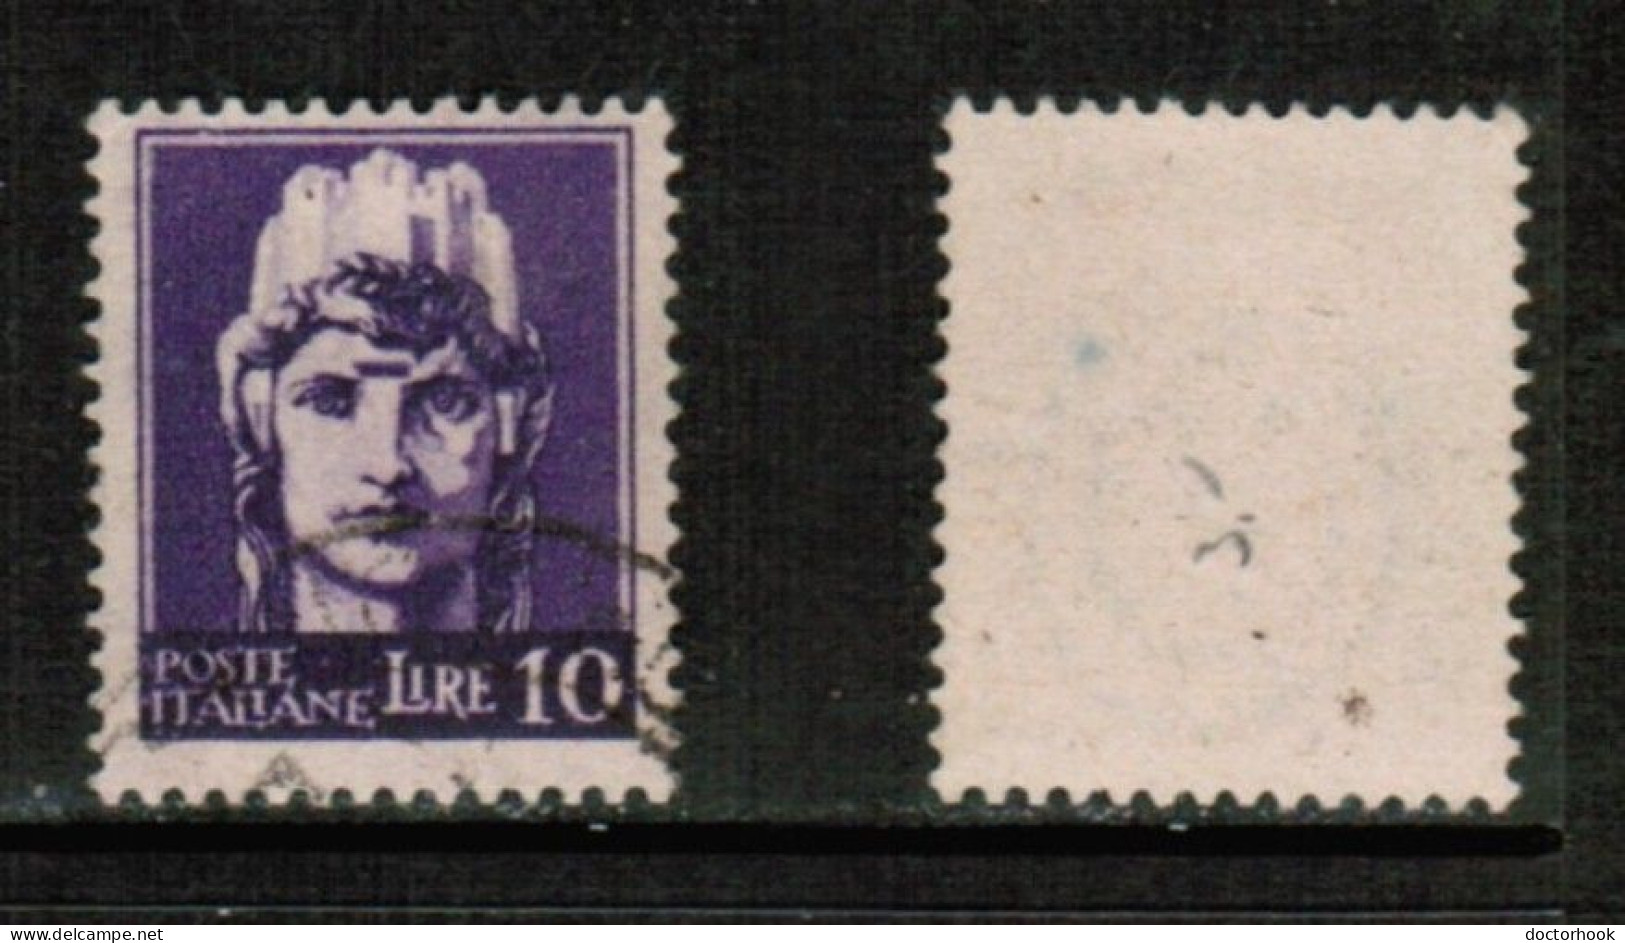 ITALY   Scott # 459 USED (CONDITION AS PER SCAN) (Stamp Scan # 938-16) - Used